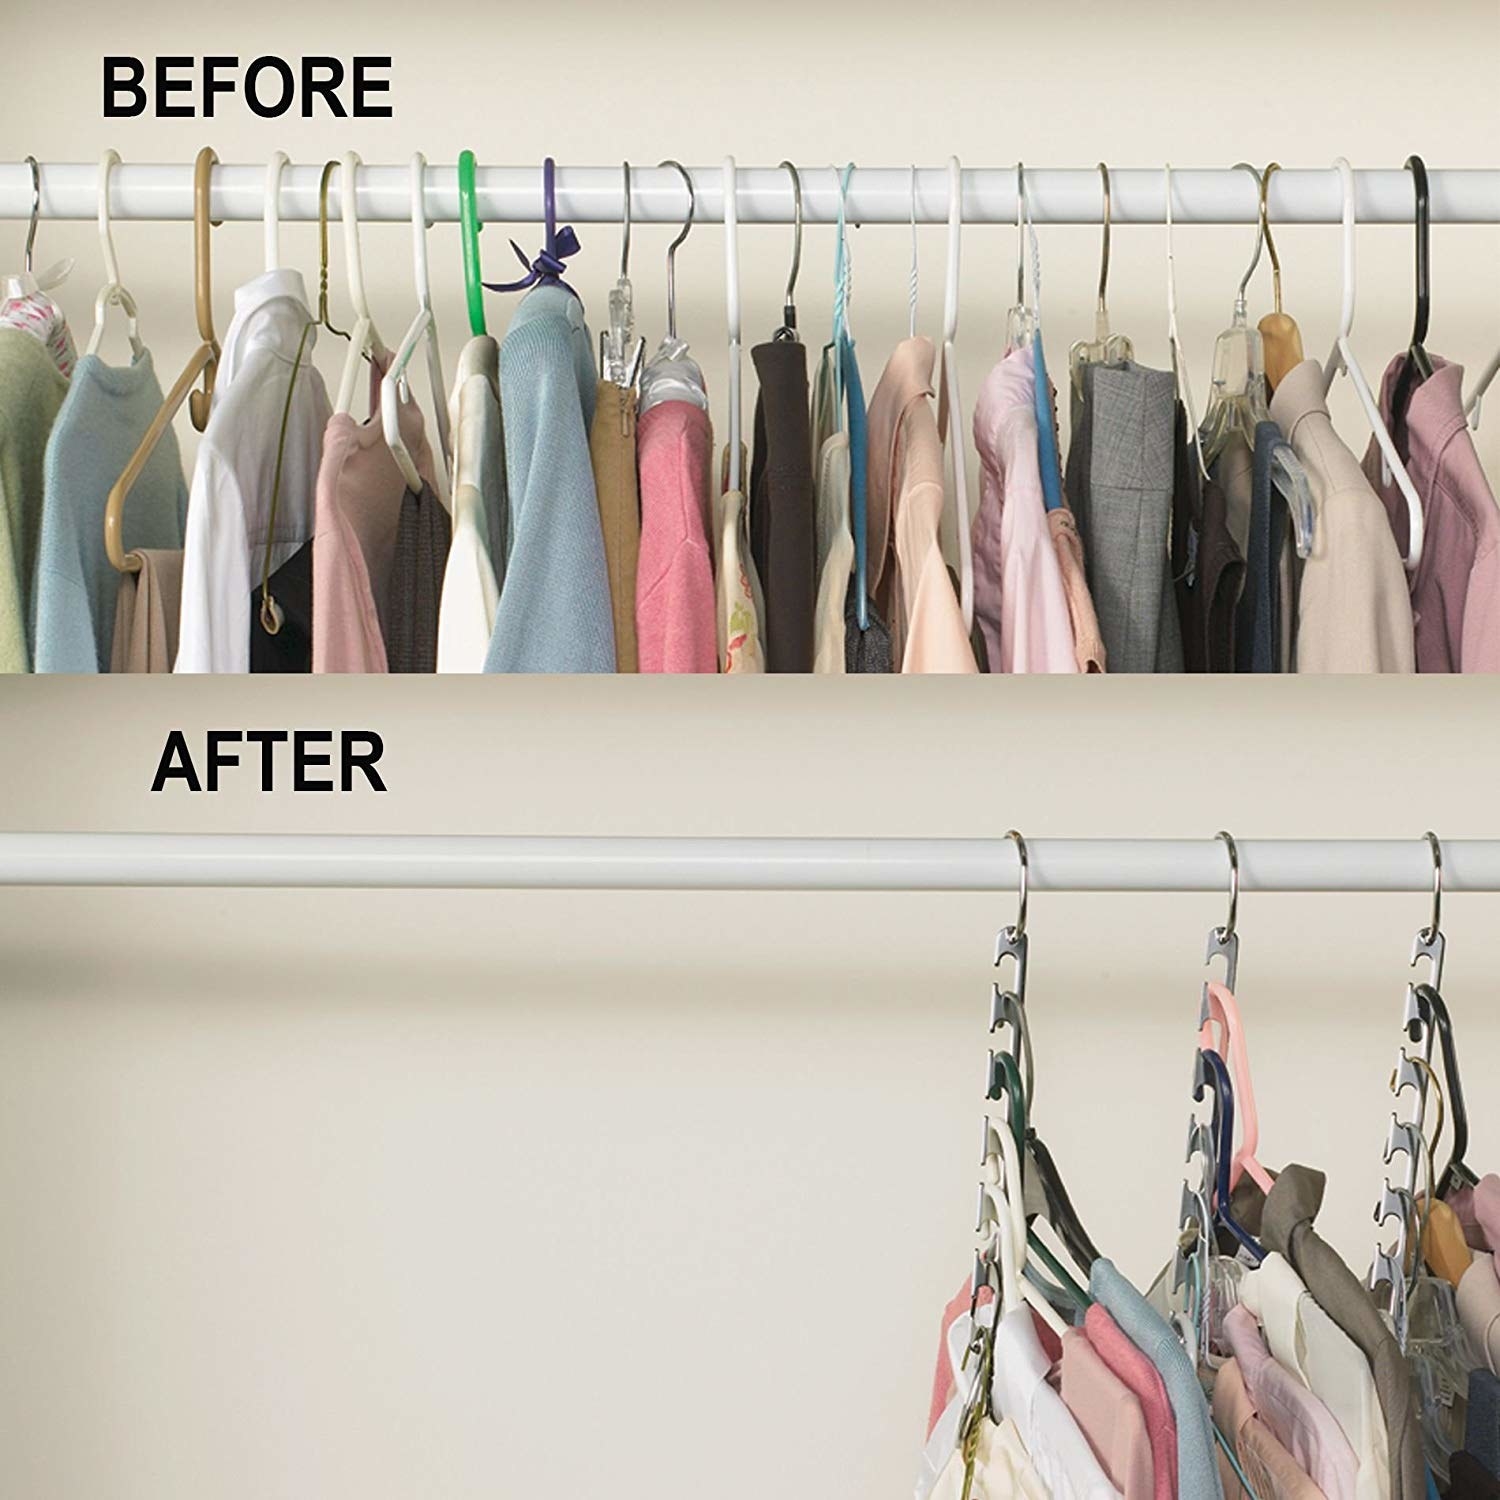 A series of before and after photos showing a full closet and then all the clothes on the hangers leaving way more room in the closet